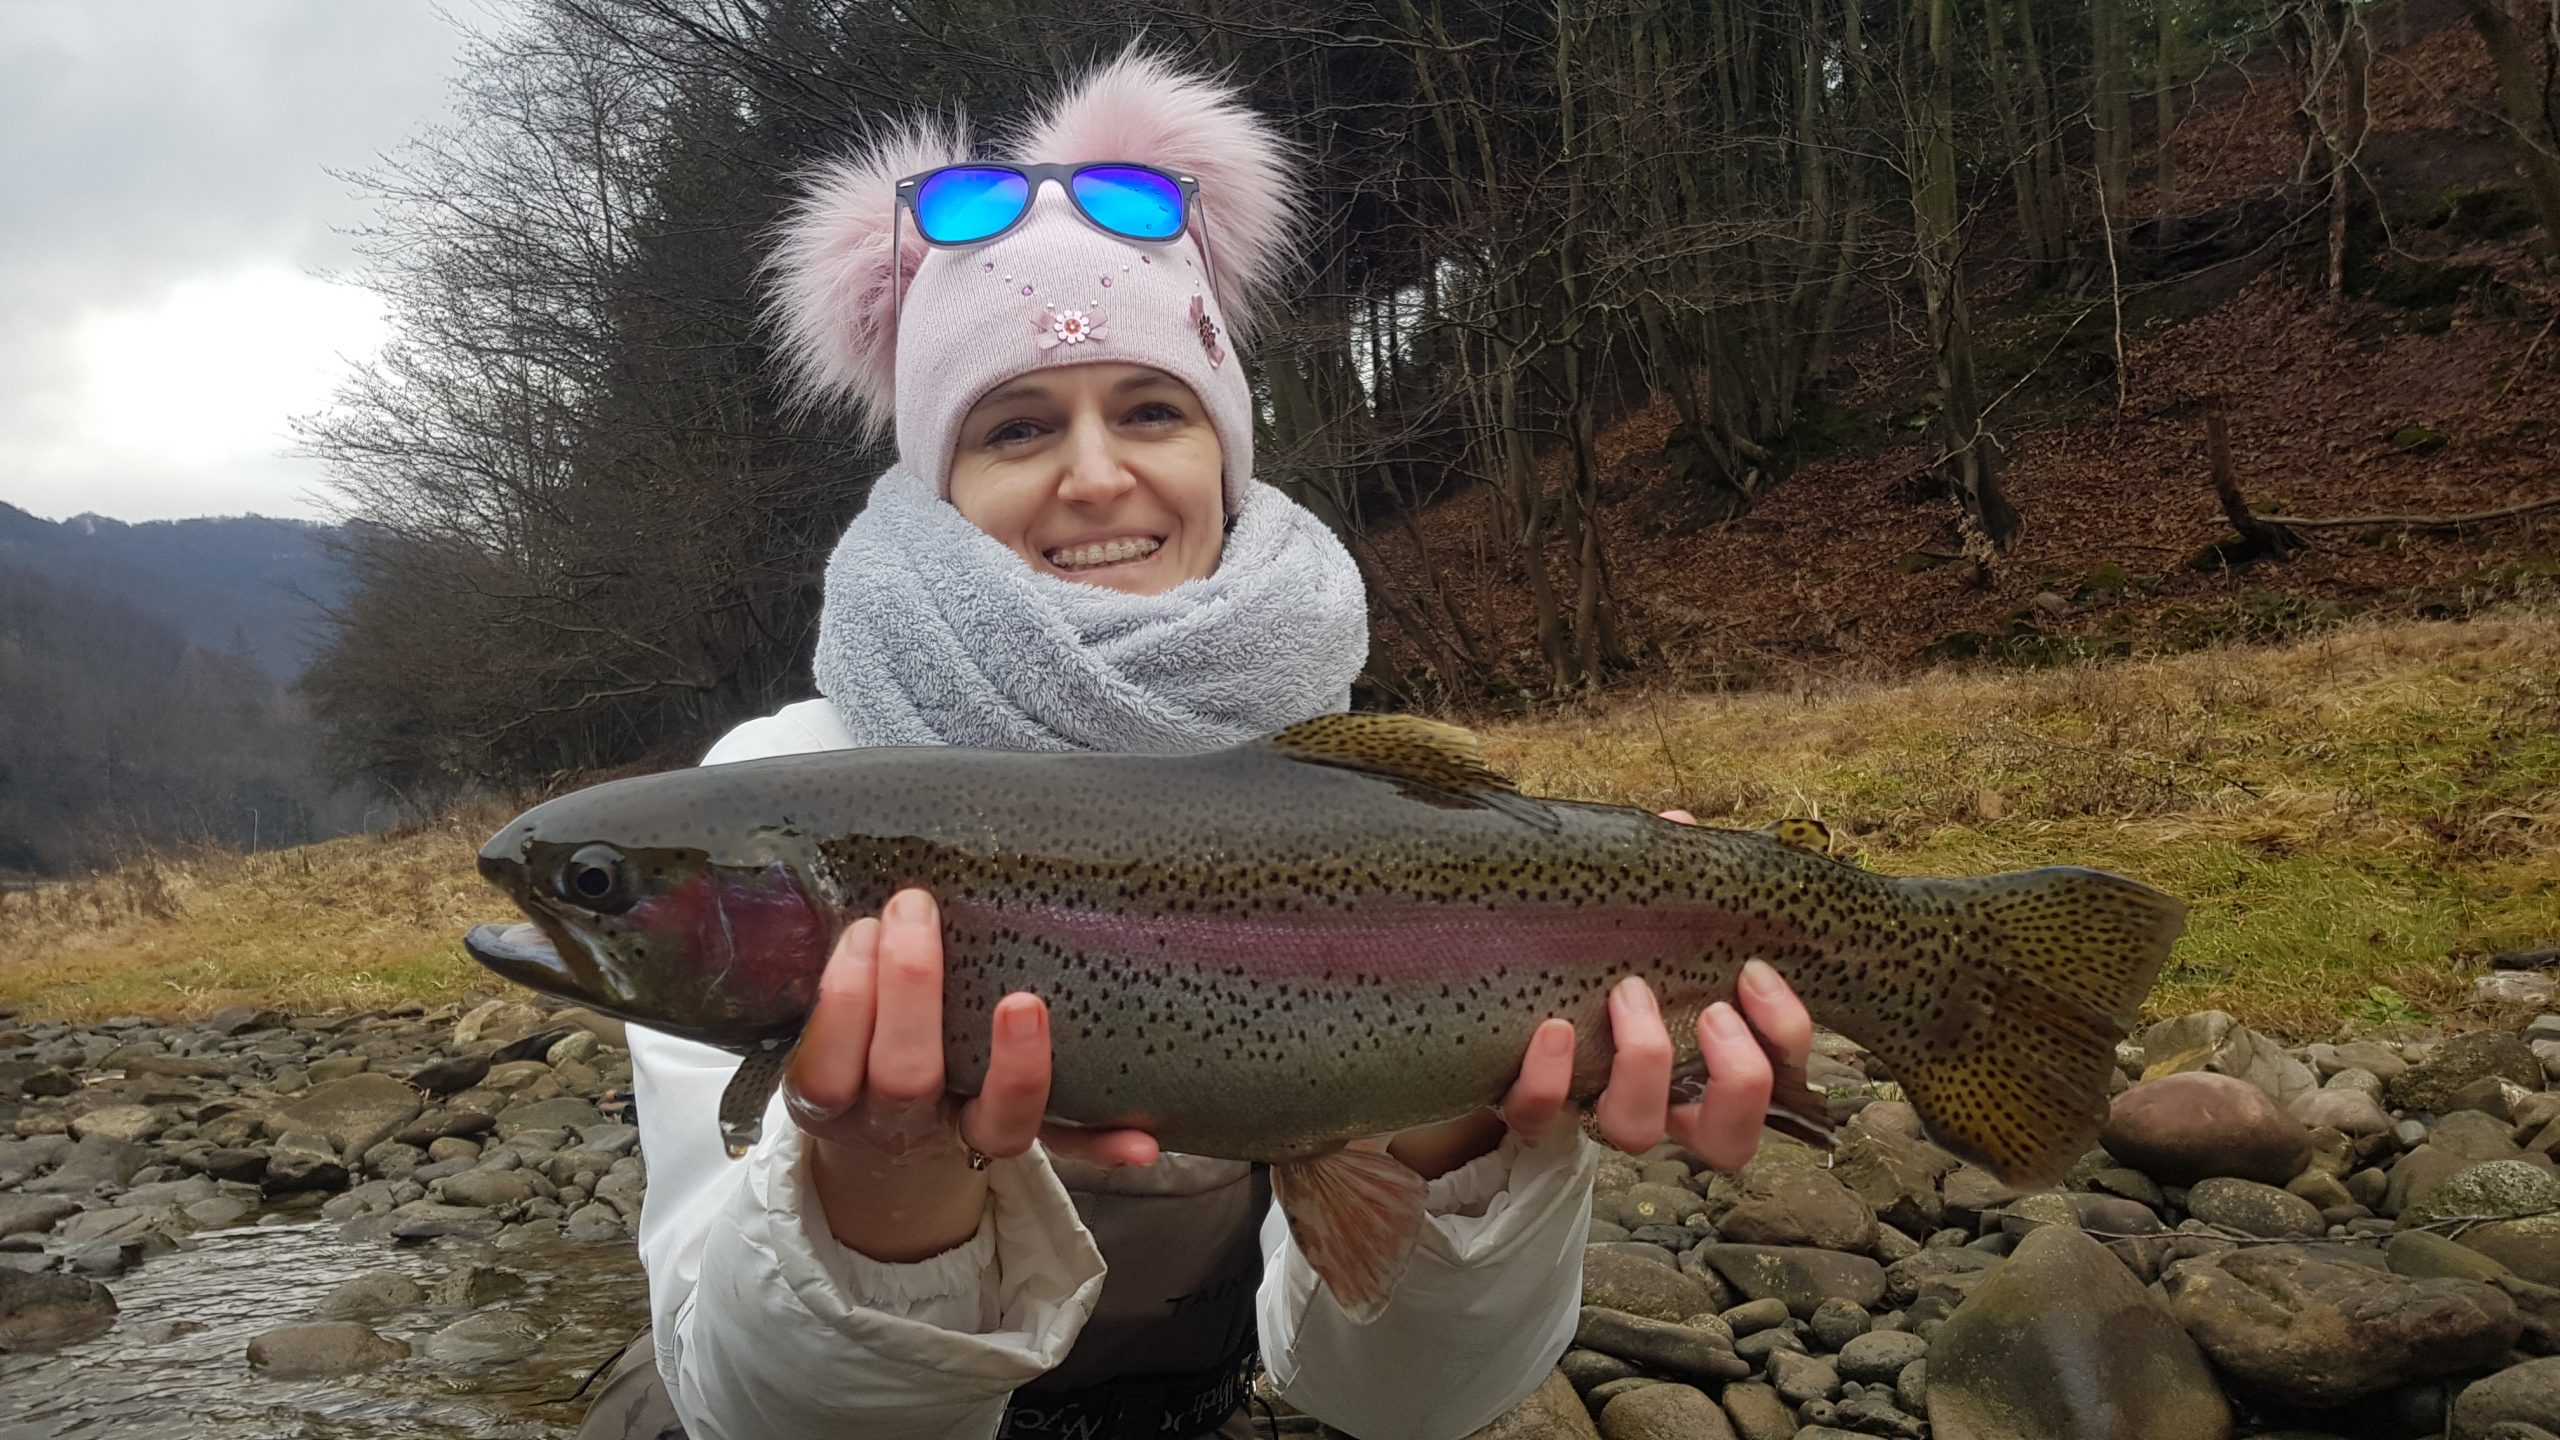 Season for trout officially open!